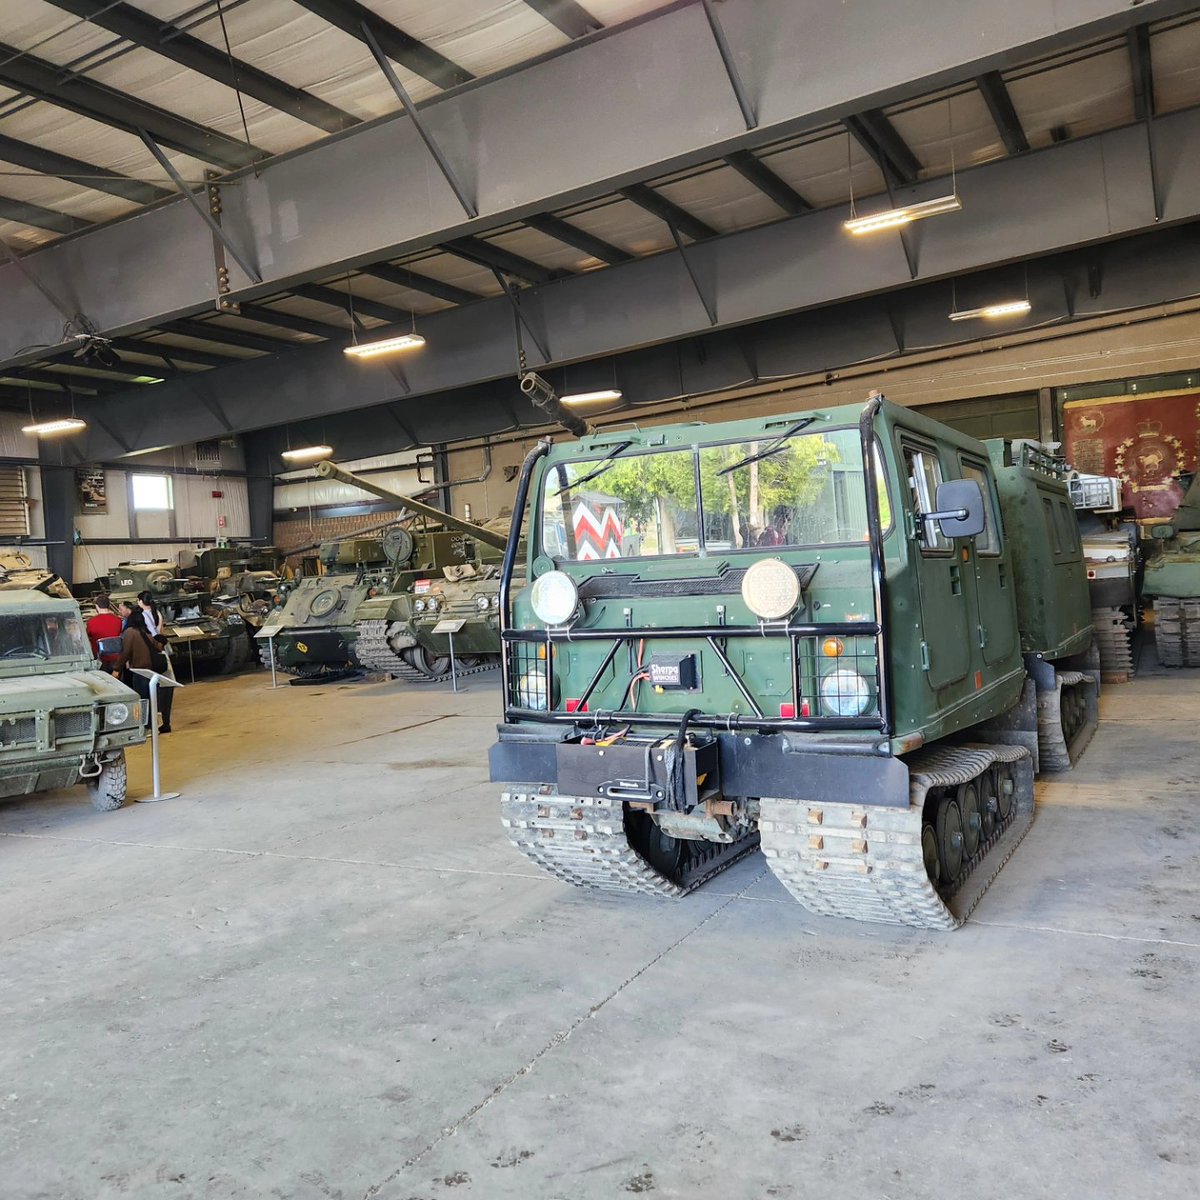 In #Oshawa, #Ontario, visit the #OntarioRegimentMuseum and #420Wing on site at the #OshawaAirport to view war memorabilia from 1812 to the #AfghanWar. Also, view an impressive tank collection on site and a congregation hall for veterans. #ttotr